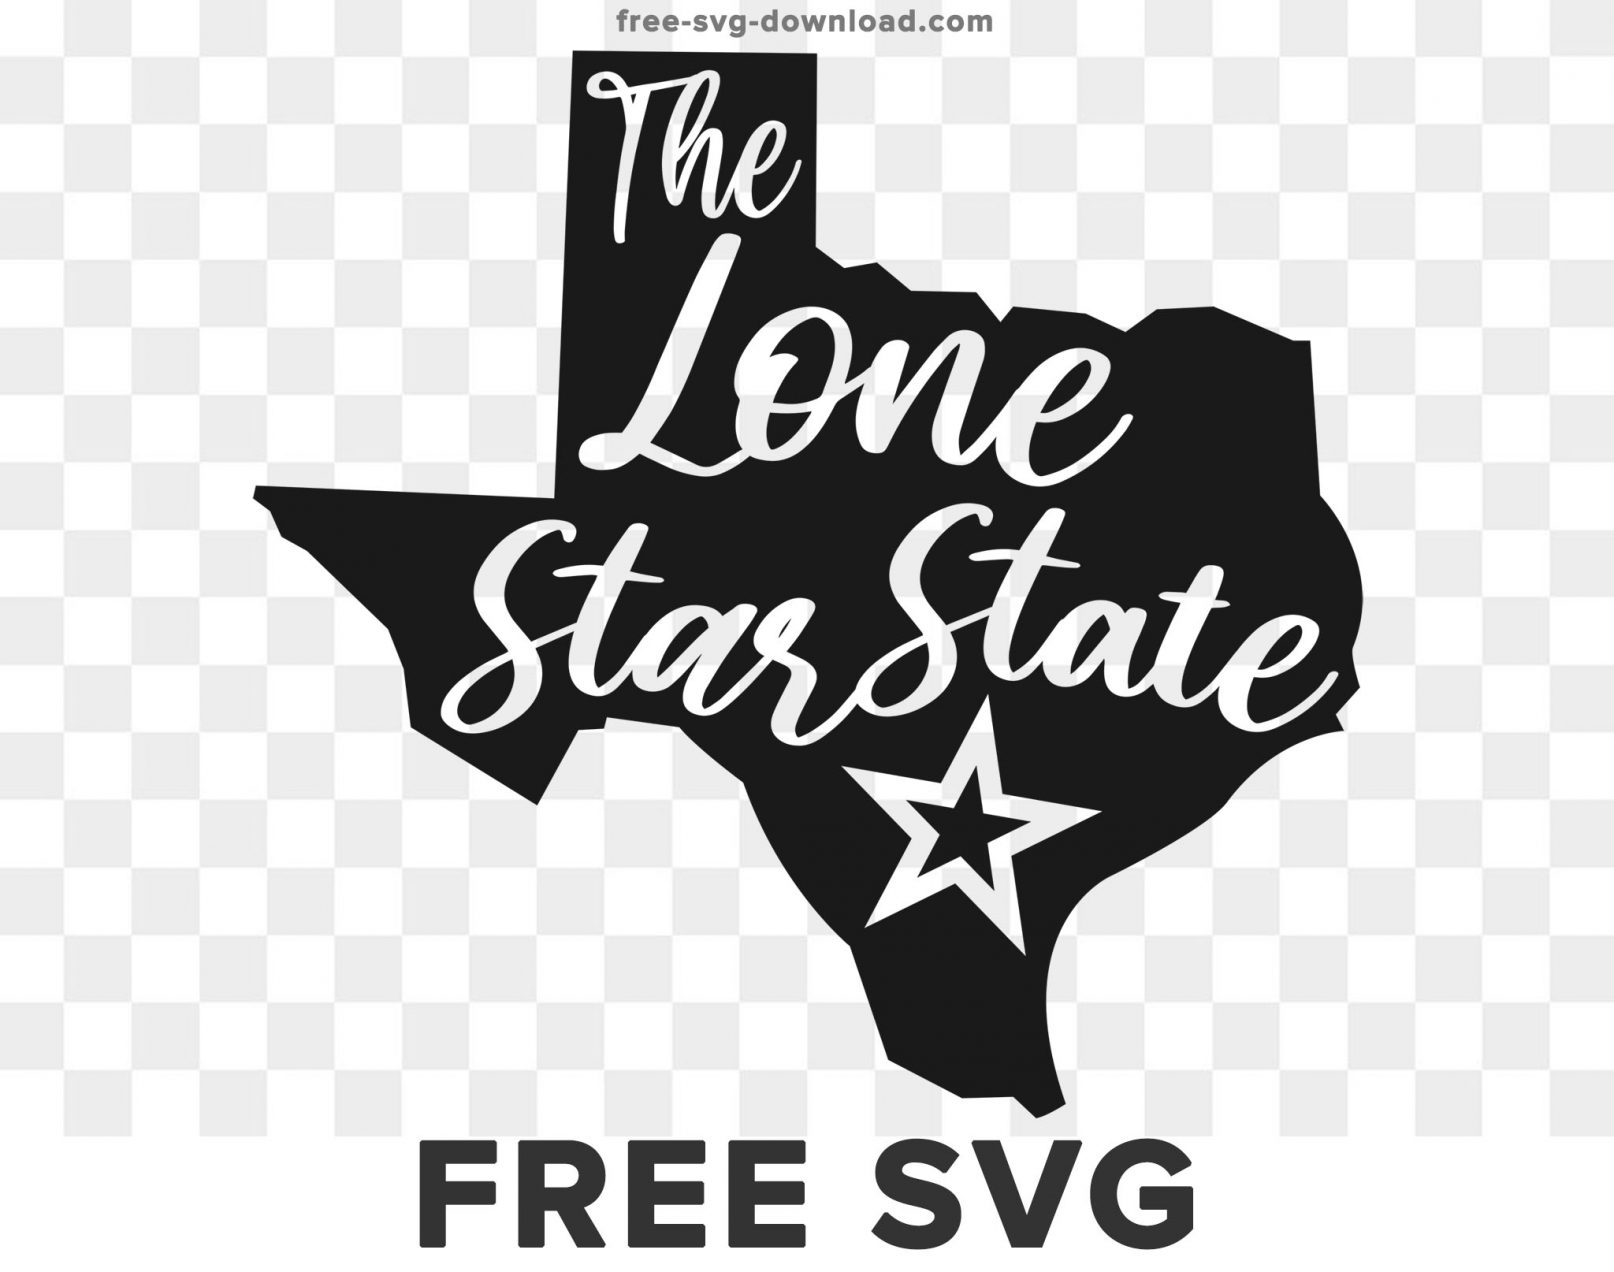 Texas Svg The lone star state | Free SVG Download